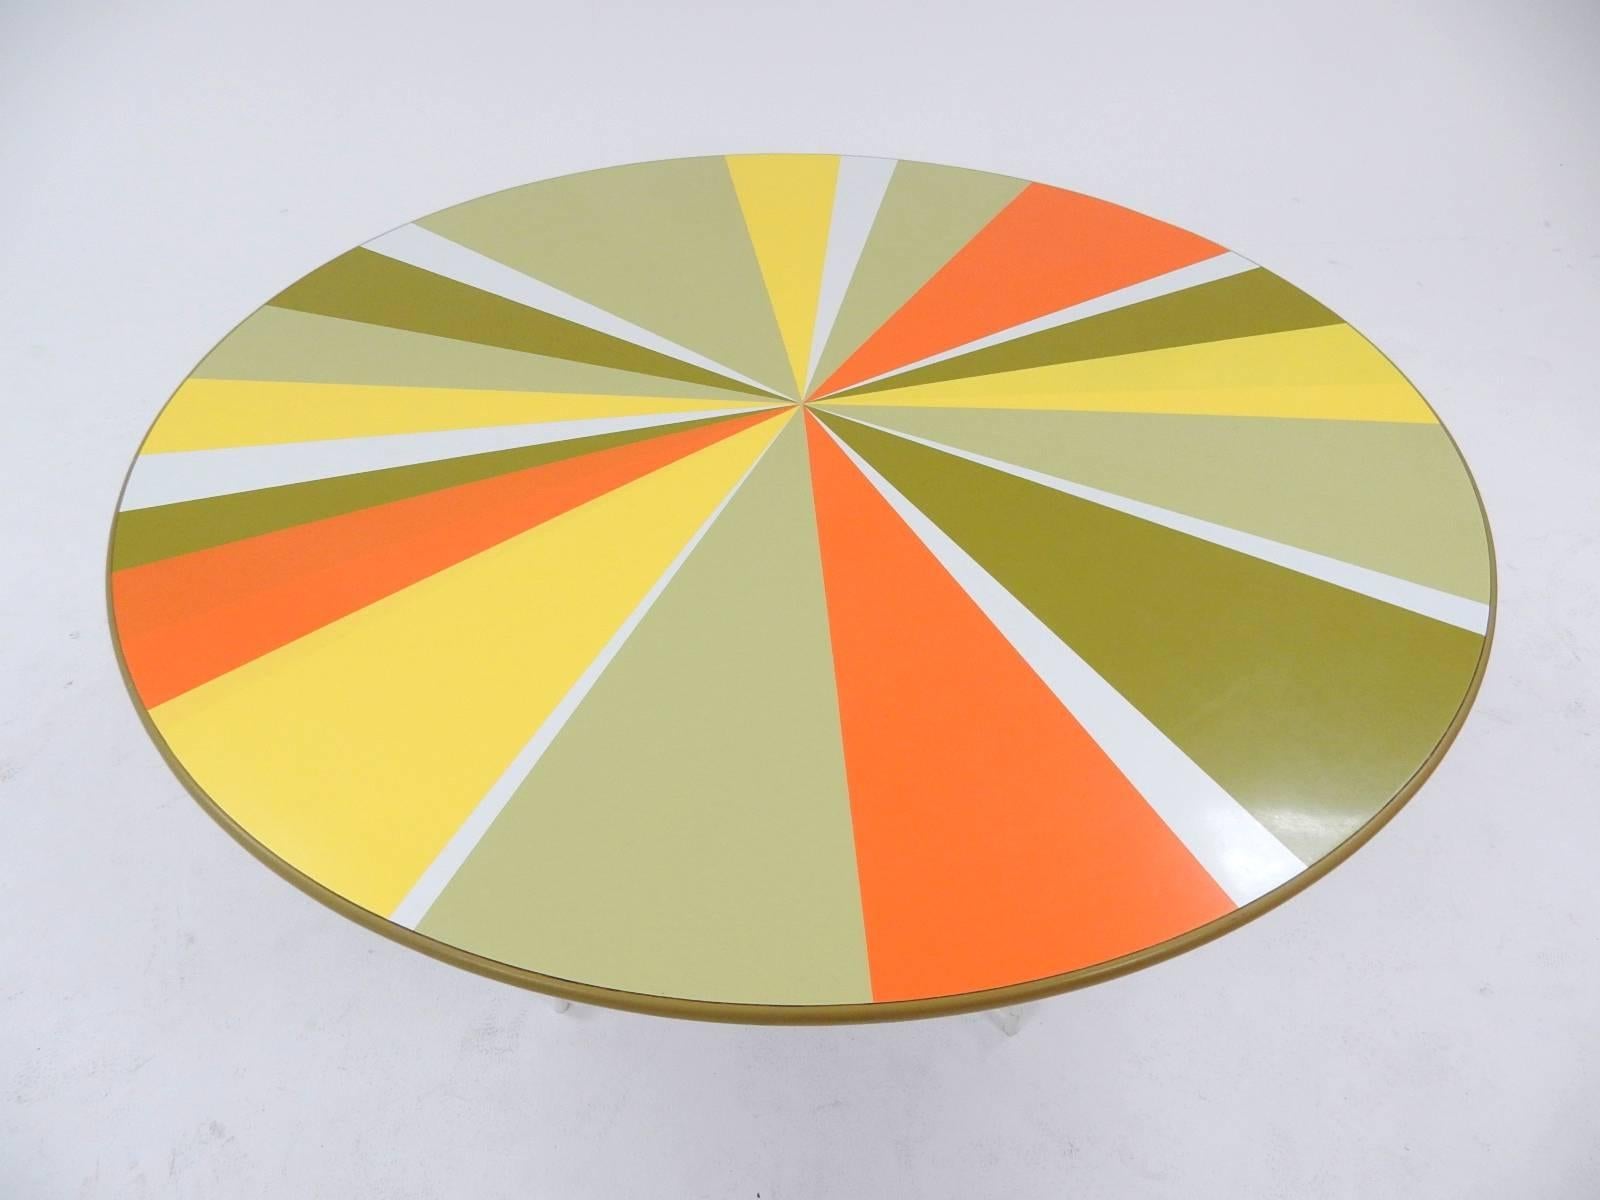 Fabulous rare Peter Pepper Products dining table, circa 1960s. 
Measures: 4 feet wide.
Pinwheel design is part of laminate top, not painted on.
Great bold colors with no fade.